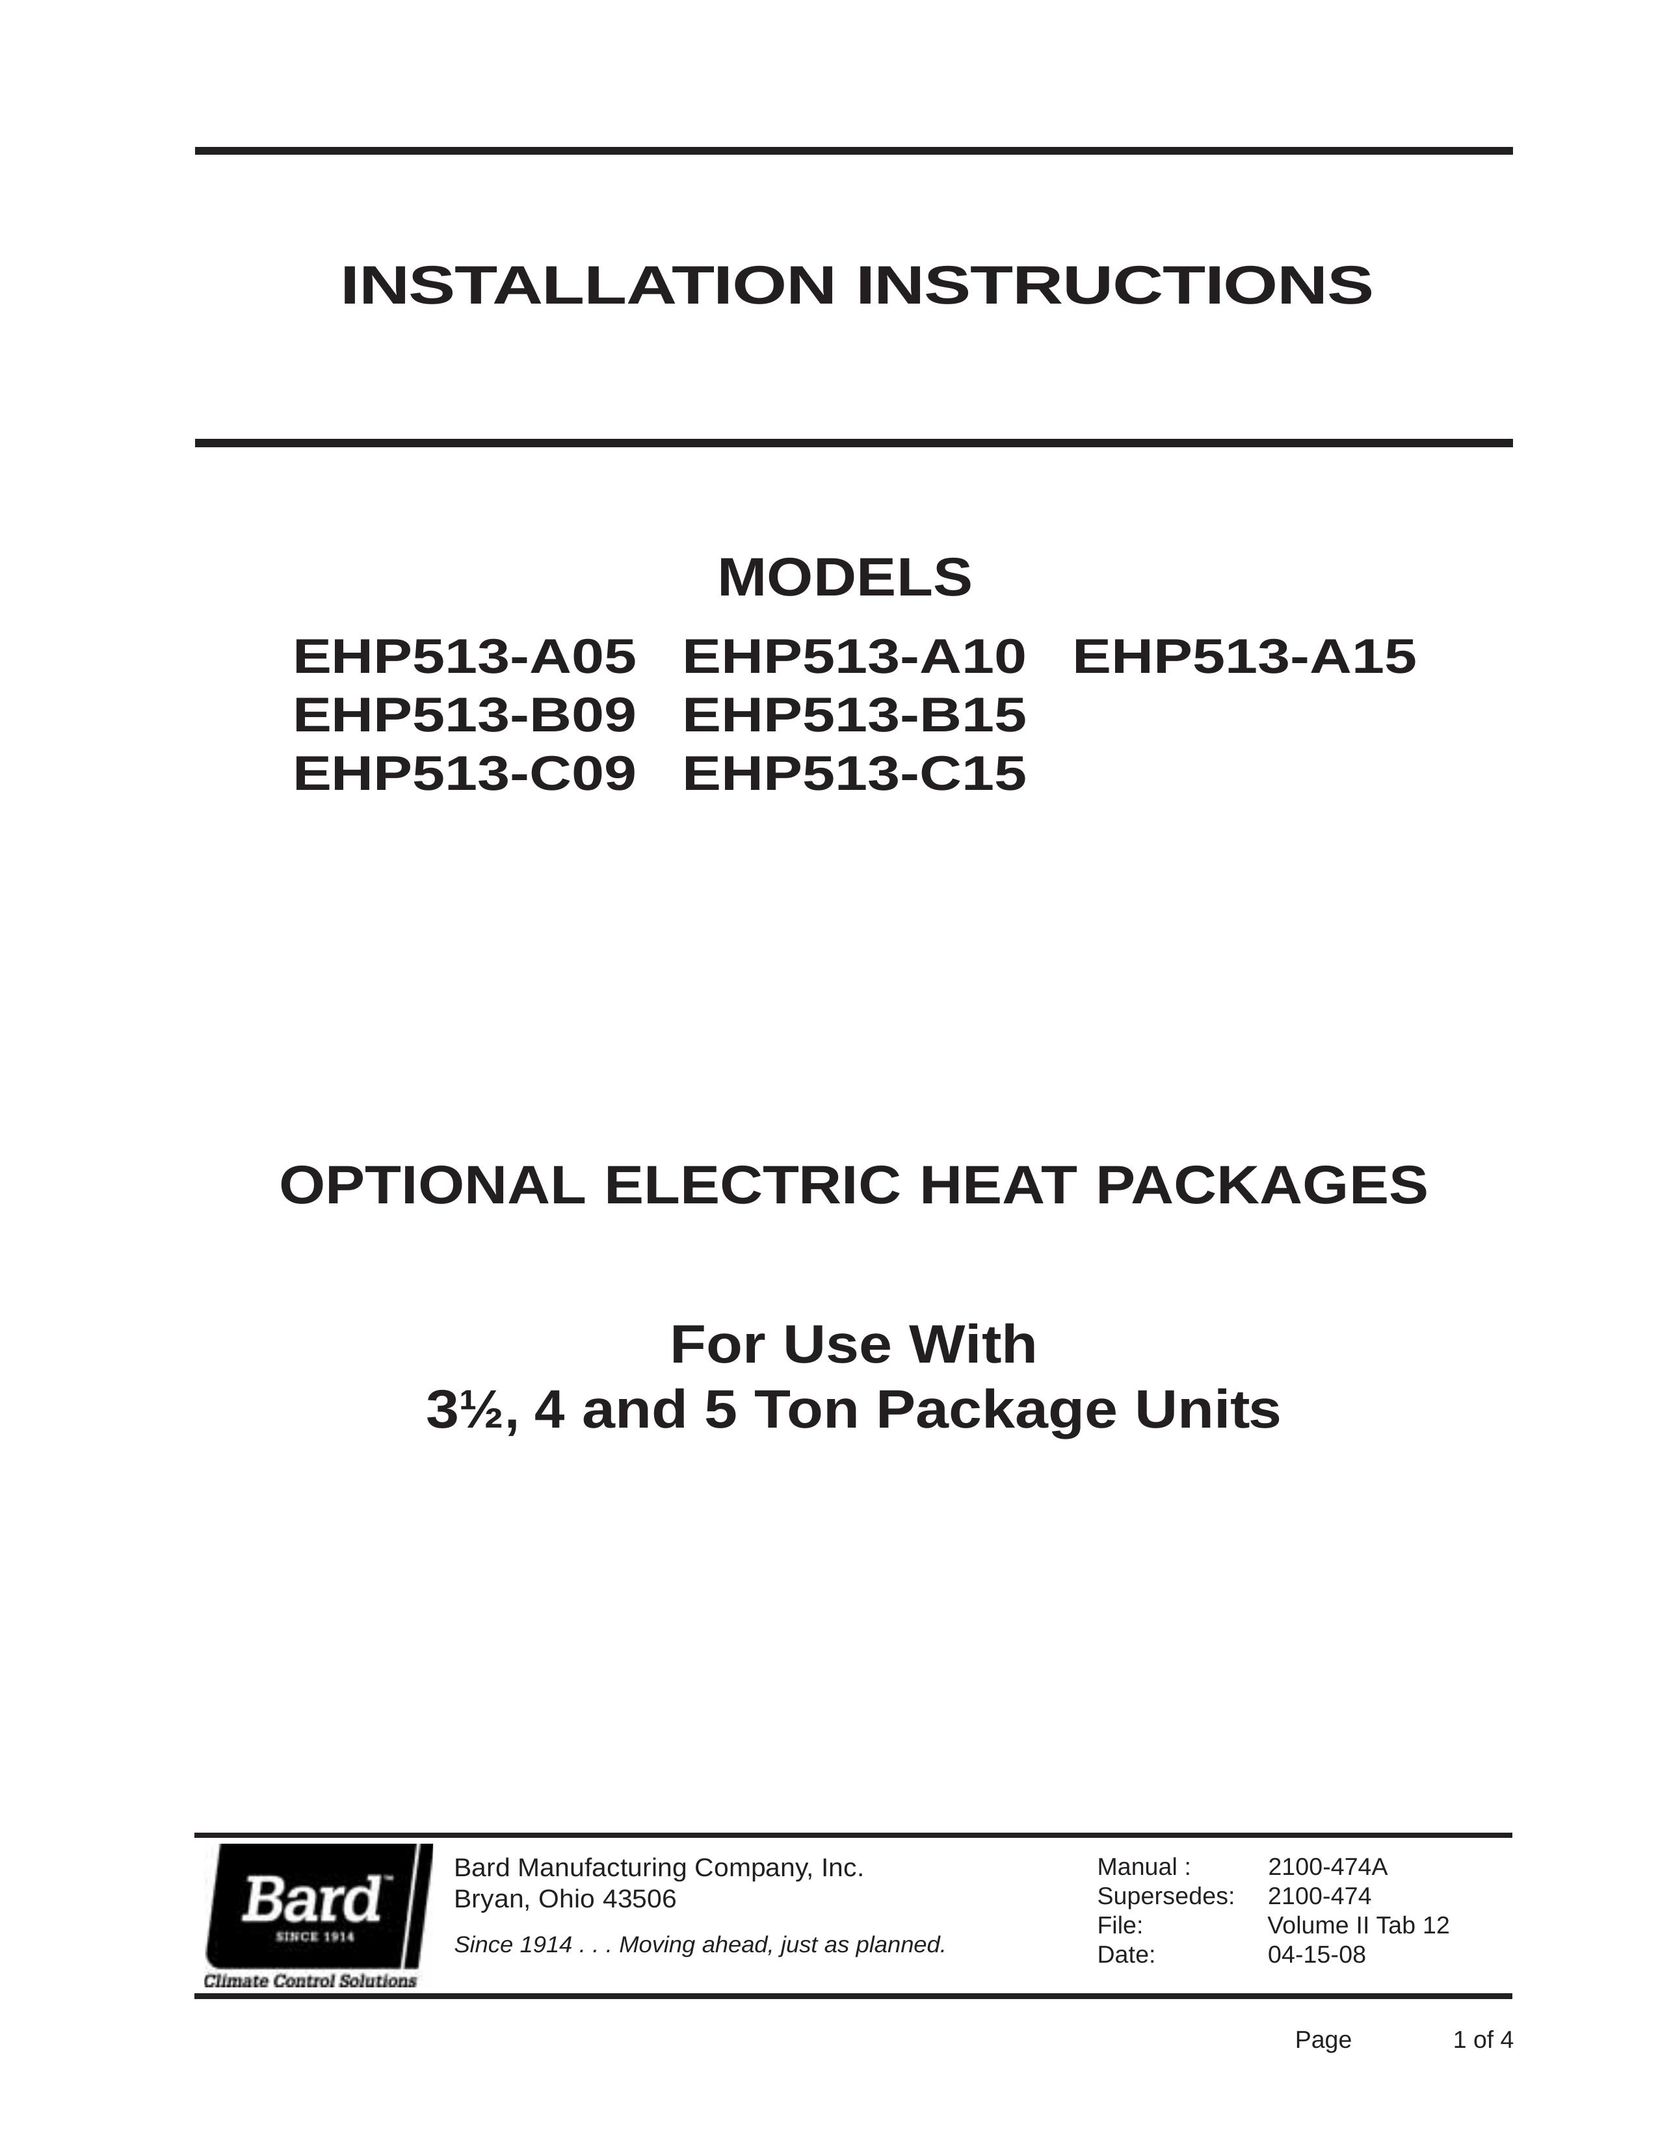 Bard EHP513-A05 Heating System User Manual